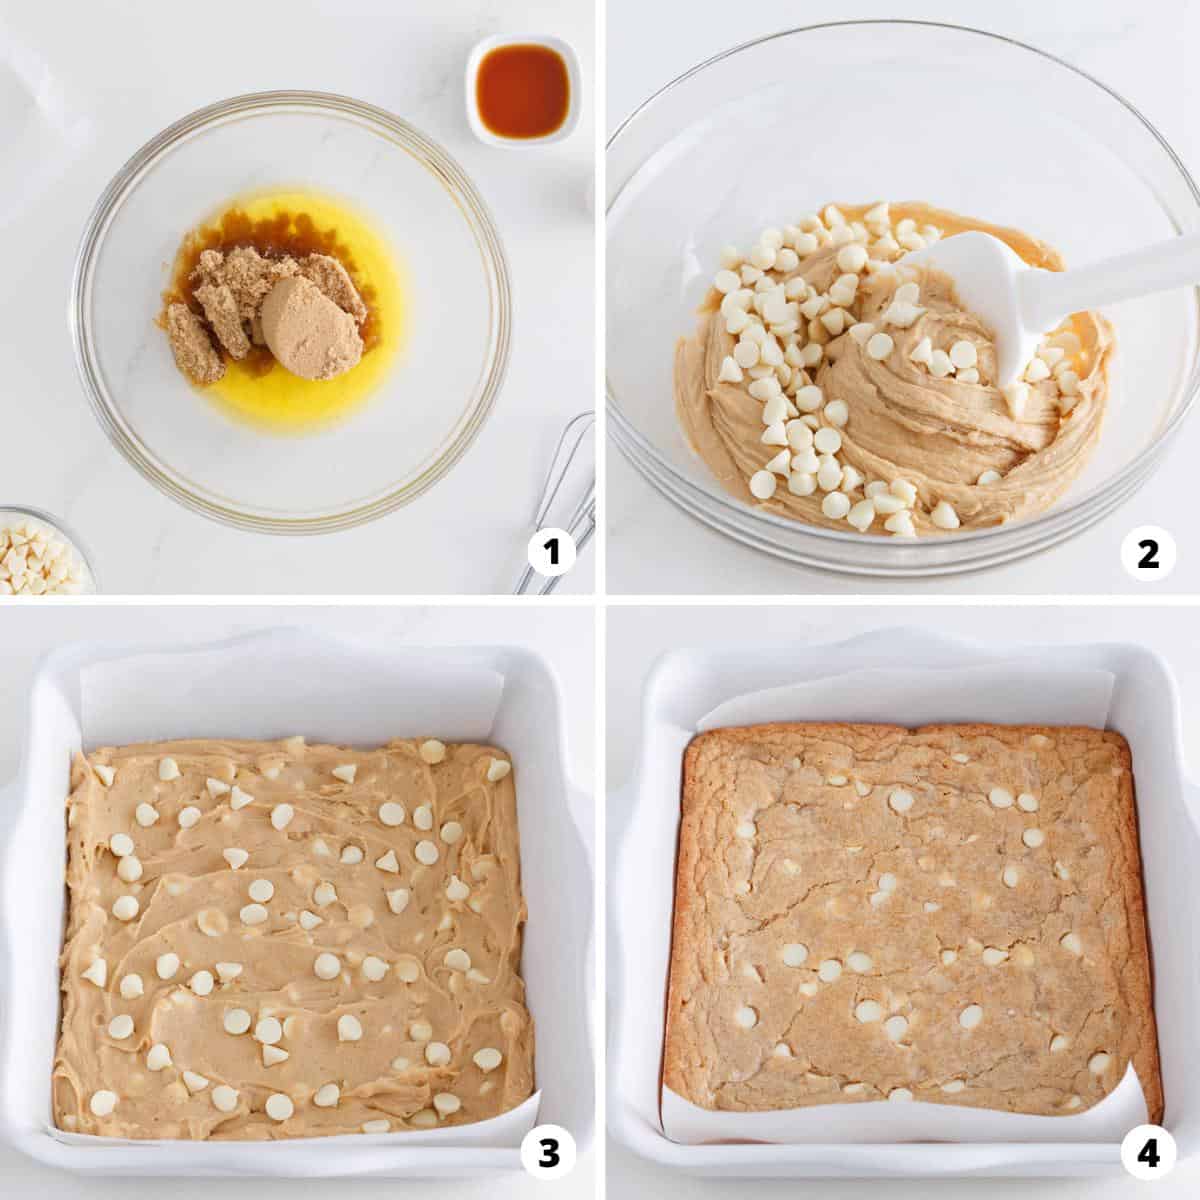 Showing how to make blondies in a 4 step collage.